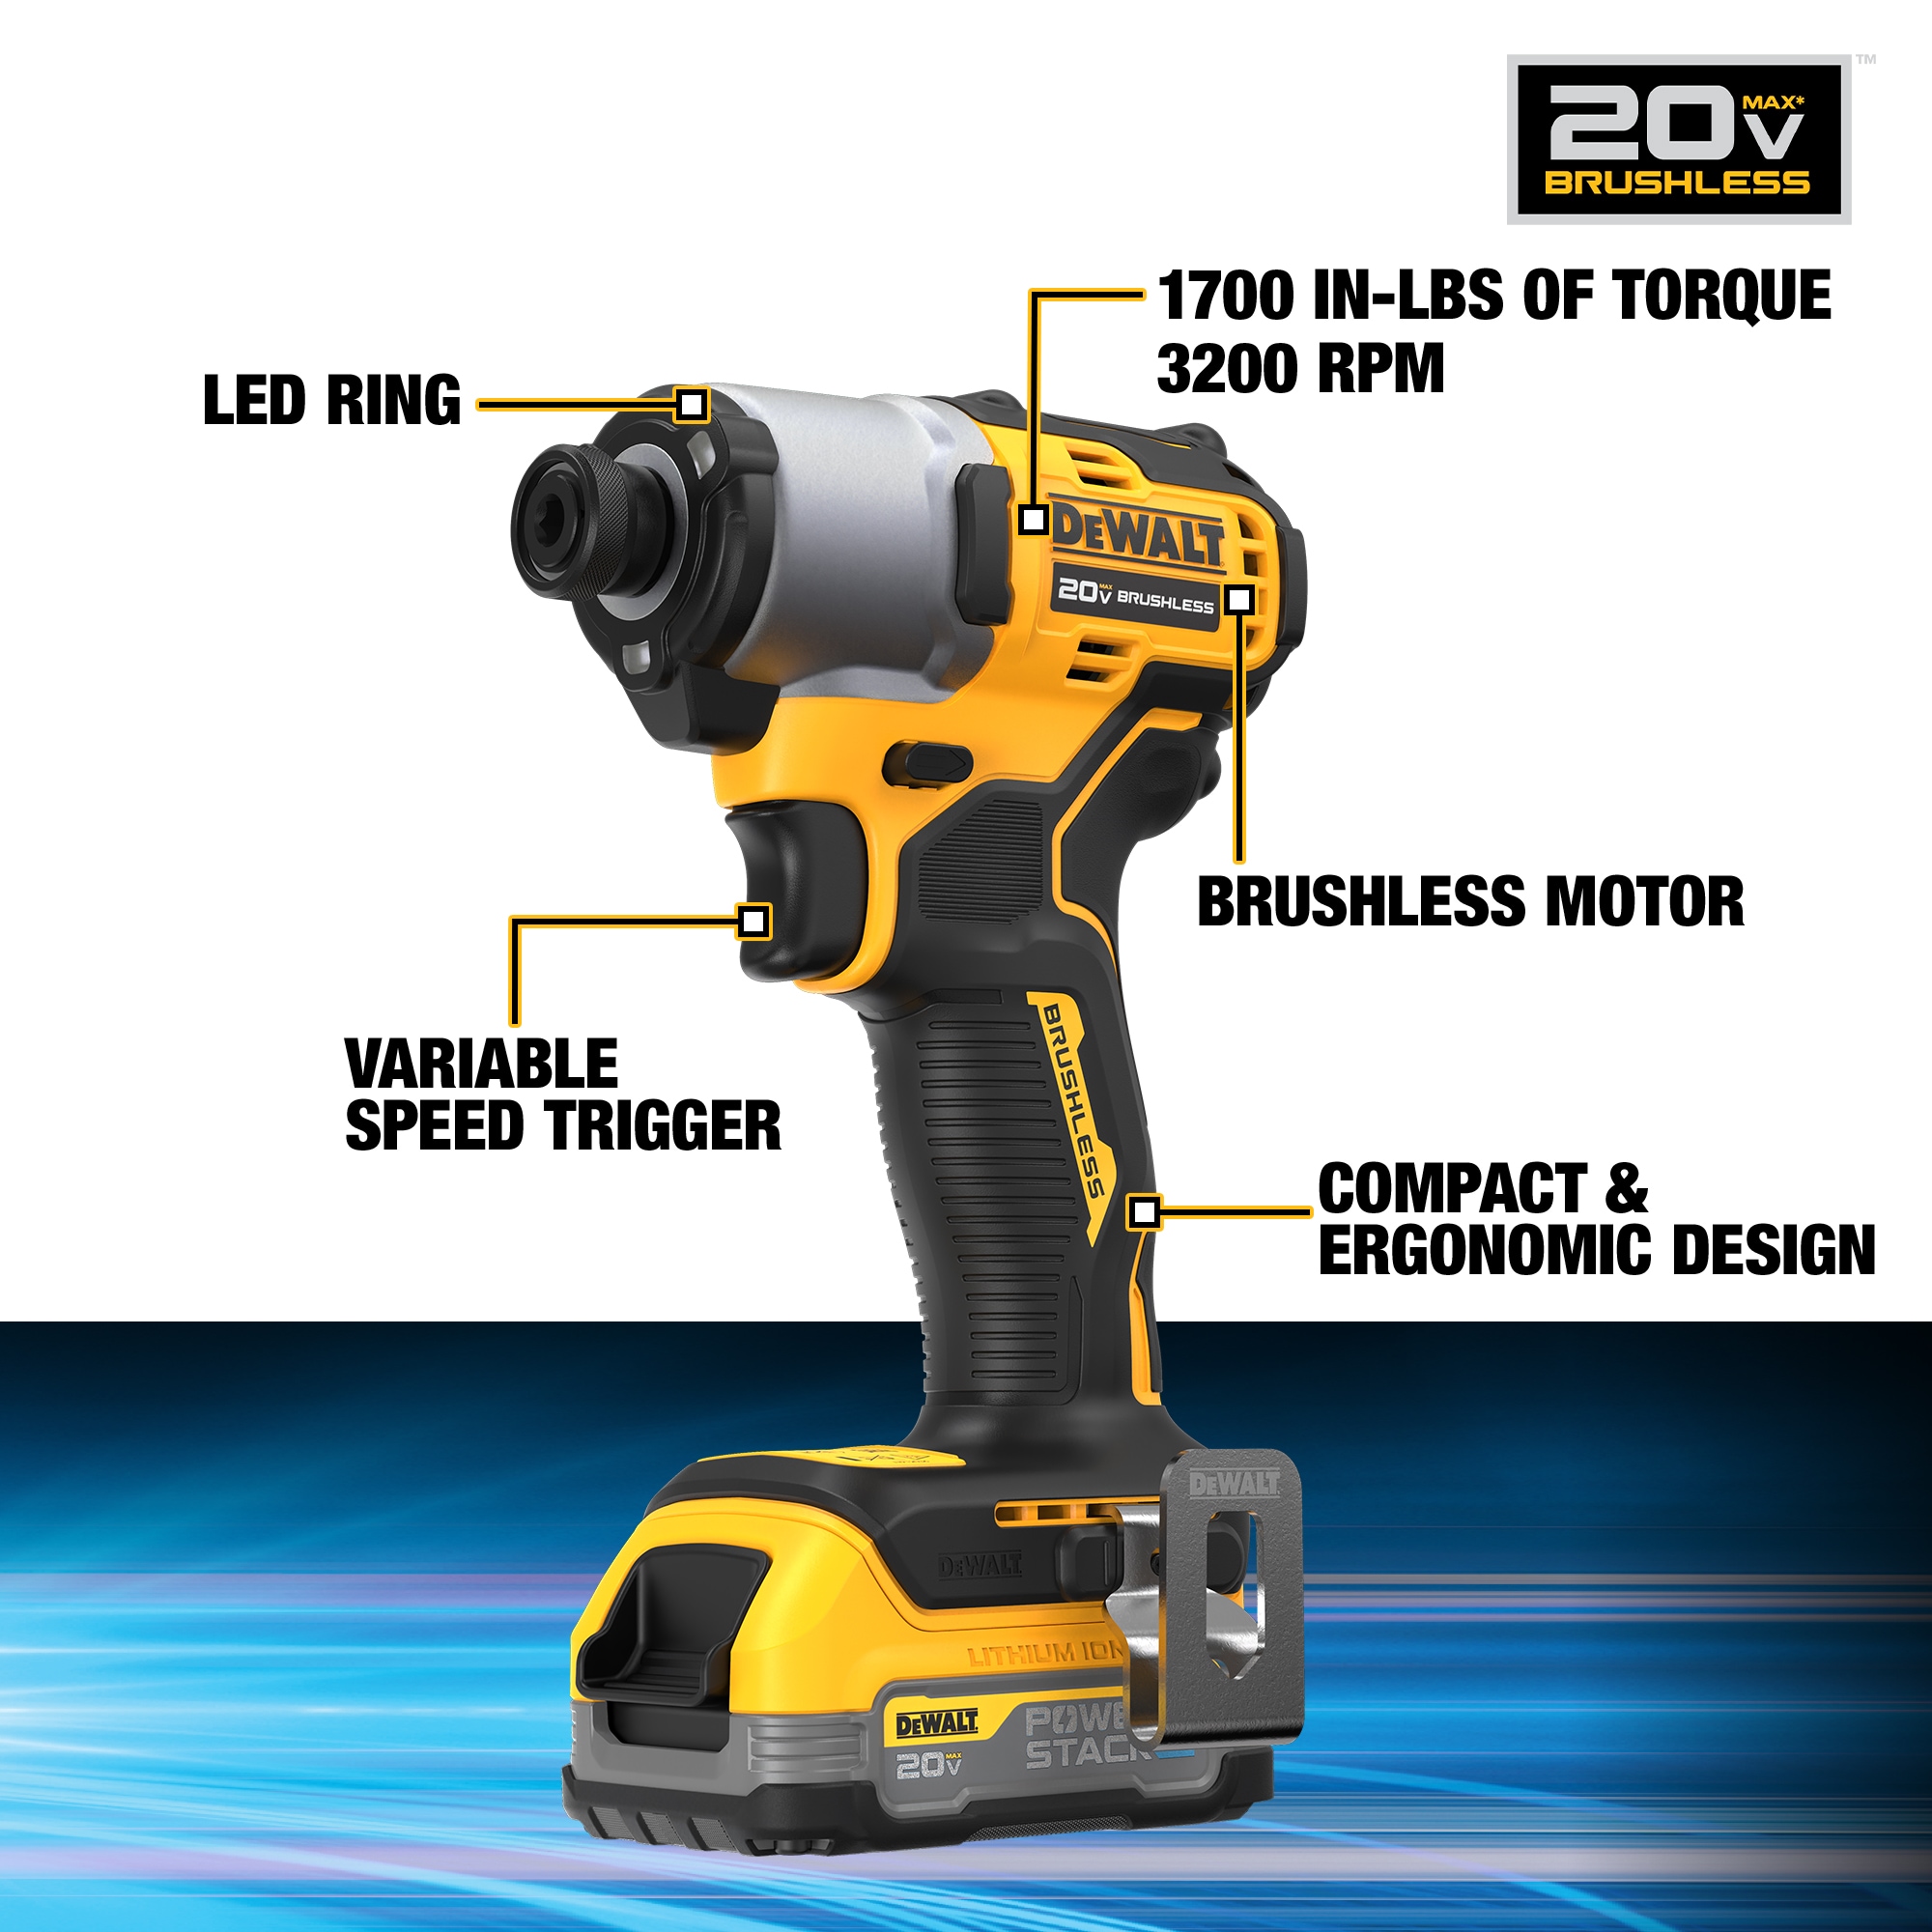 The Next Dimension in Power: DEWALT Introduces POWERSTACK™ 20V MAX